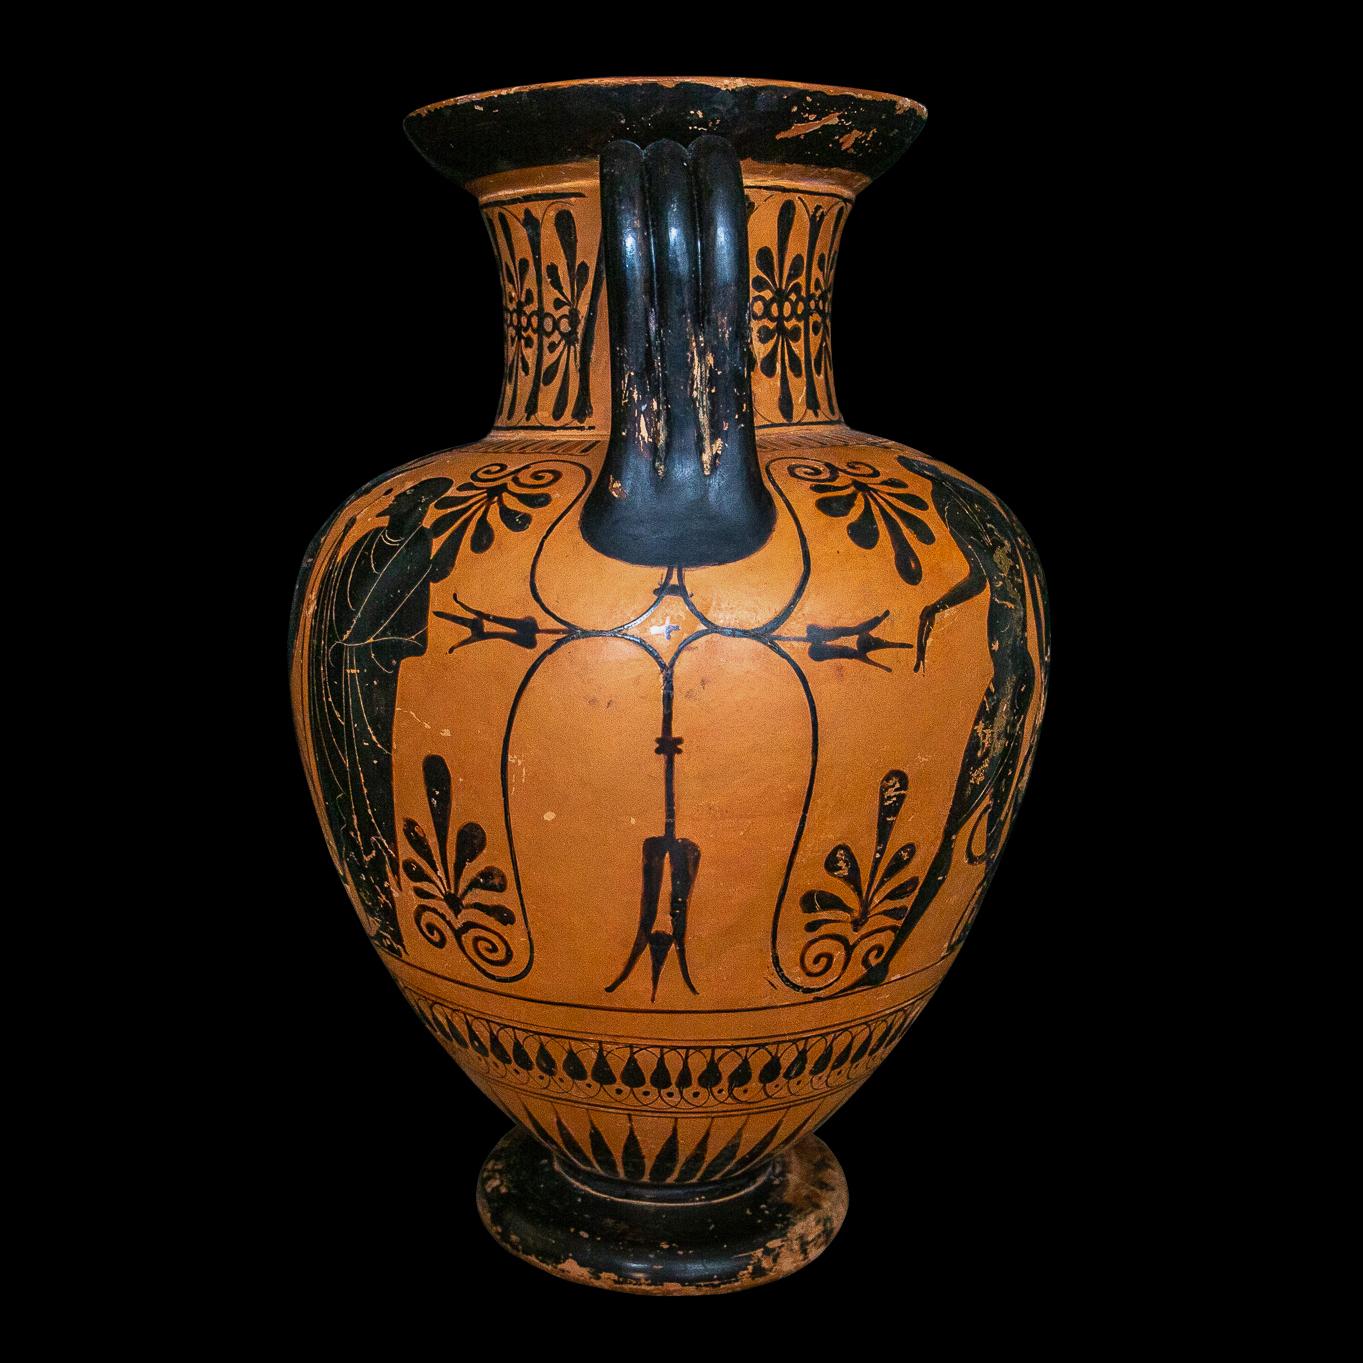 An Attic black-figure amphora with incised details, characterized by triple handles and torus foot. On the neck, palmette-lotus chain elements and on the shoulder tongues pattern. Under each handles, a configuration of four palmettes and volutes in